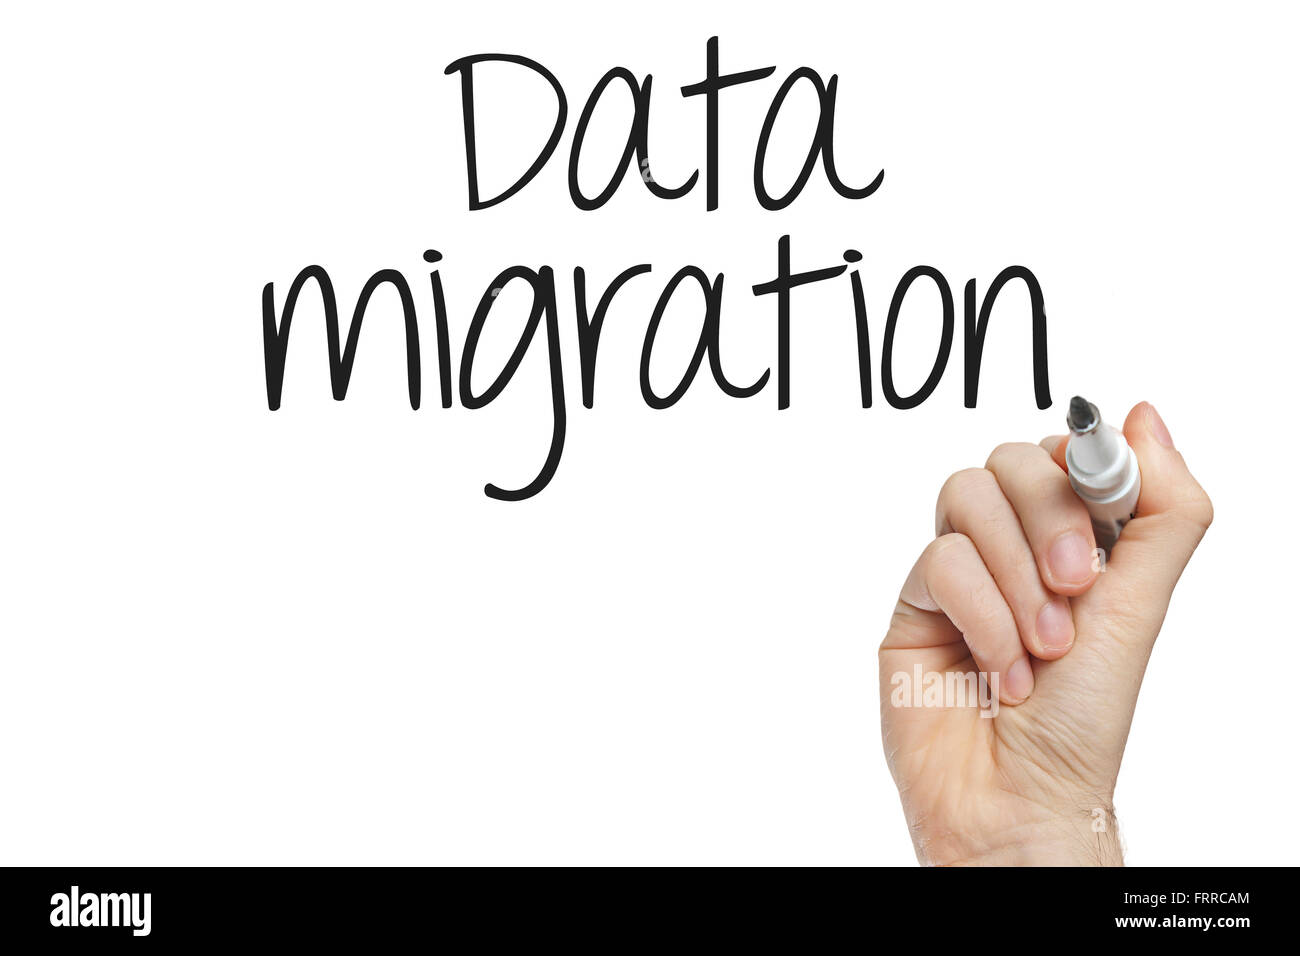 Hand writing data migration on a white board Stock Photo